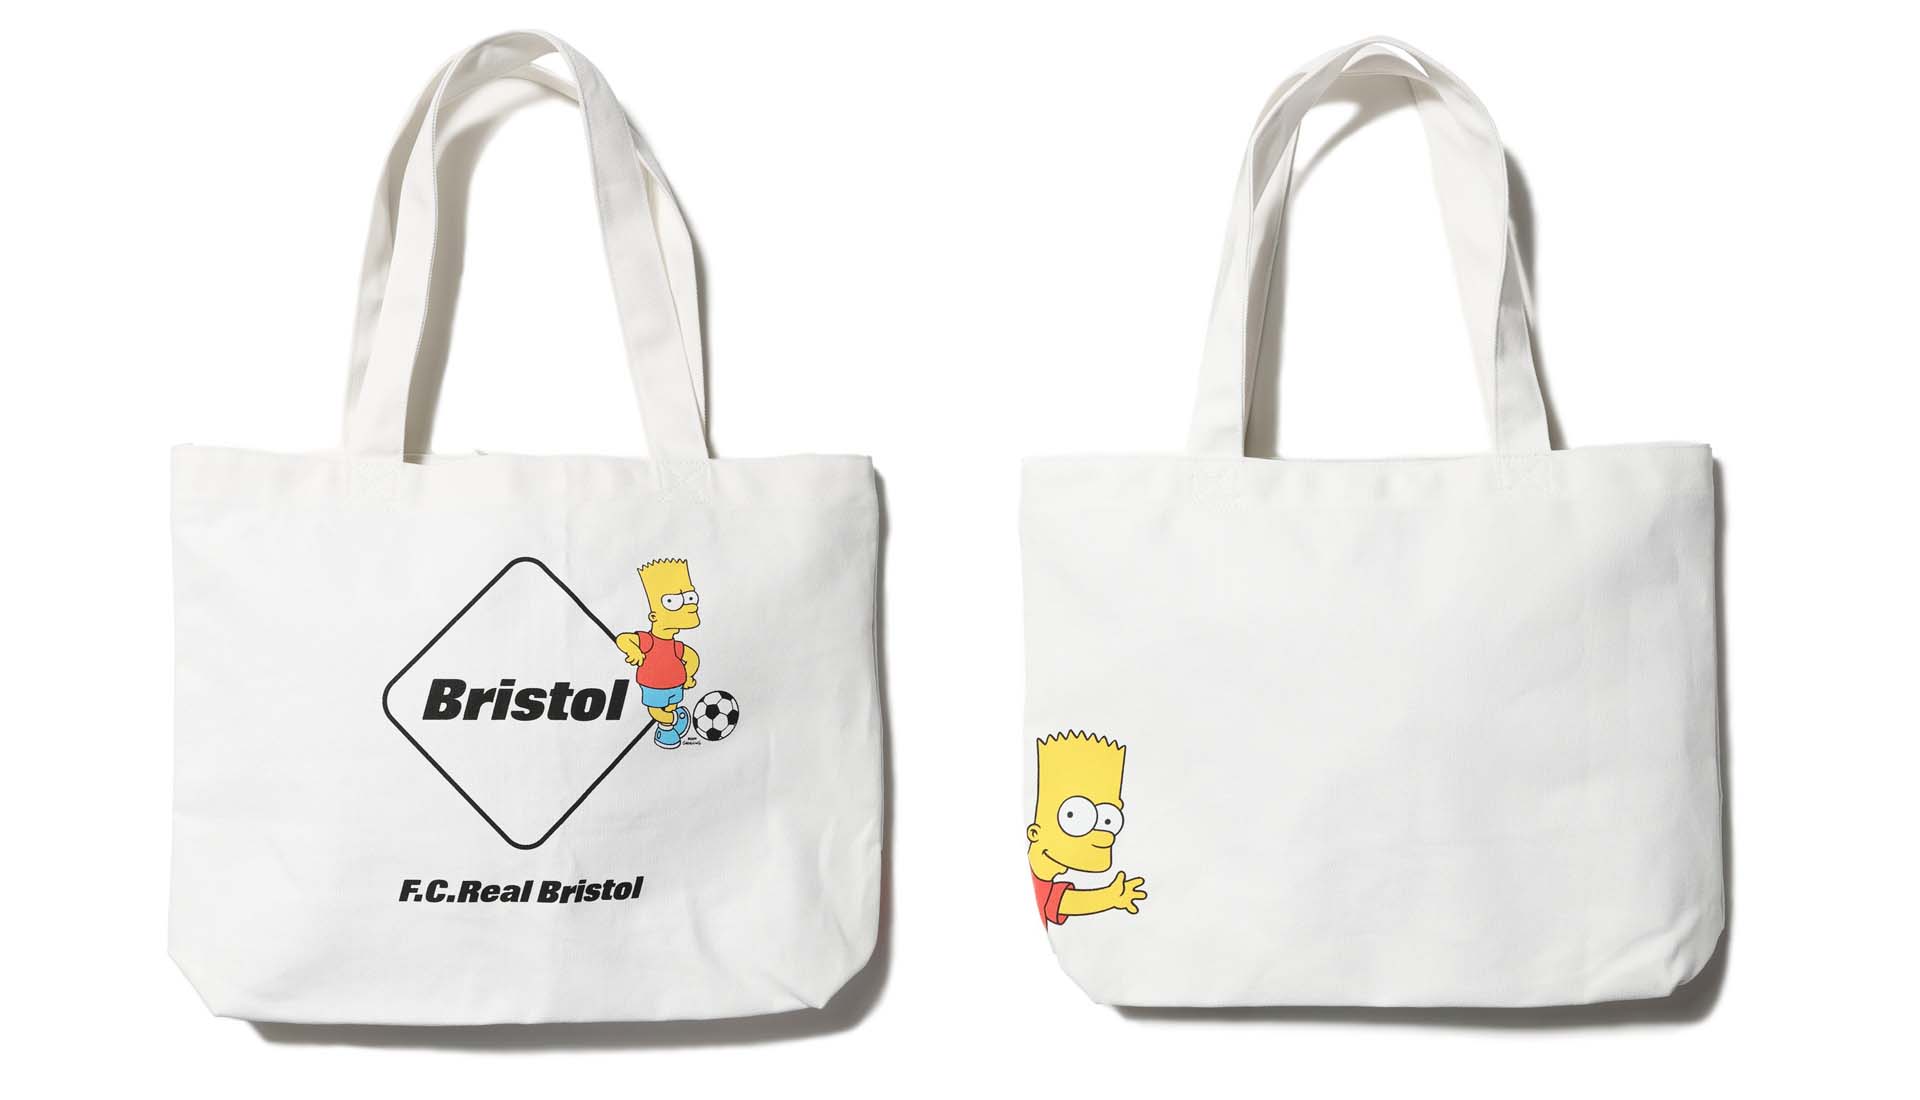 F.C. Real Bristol To Drop Simpsons Capsule Collection - SoccerBible